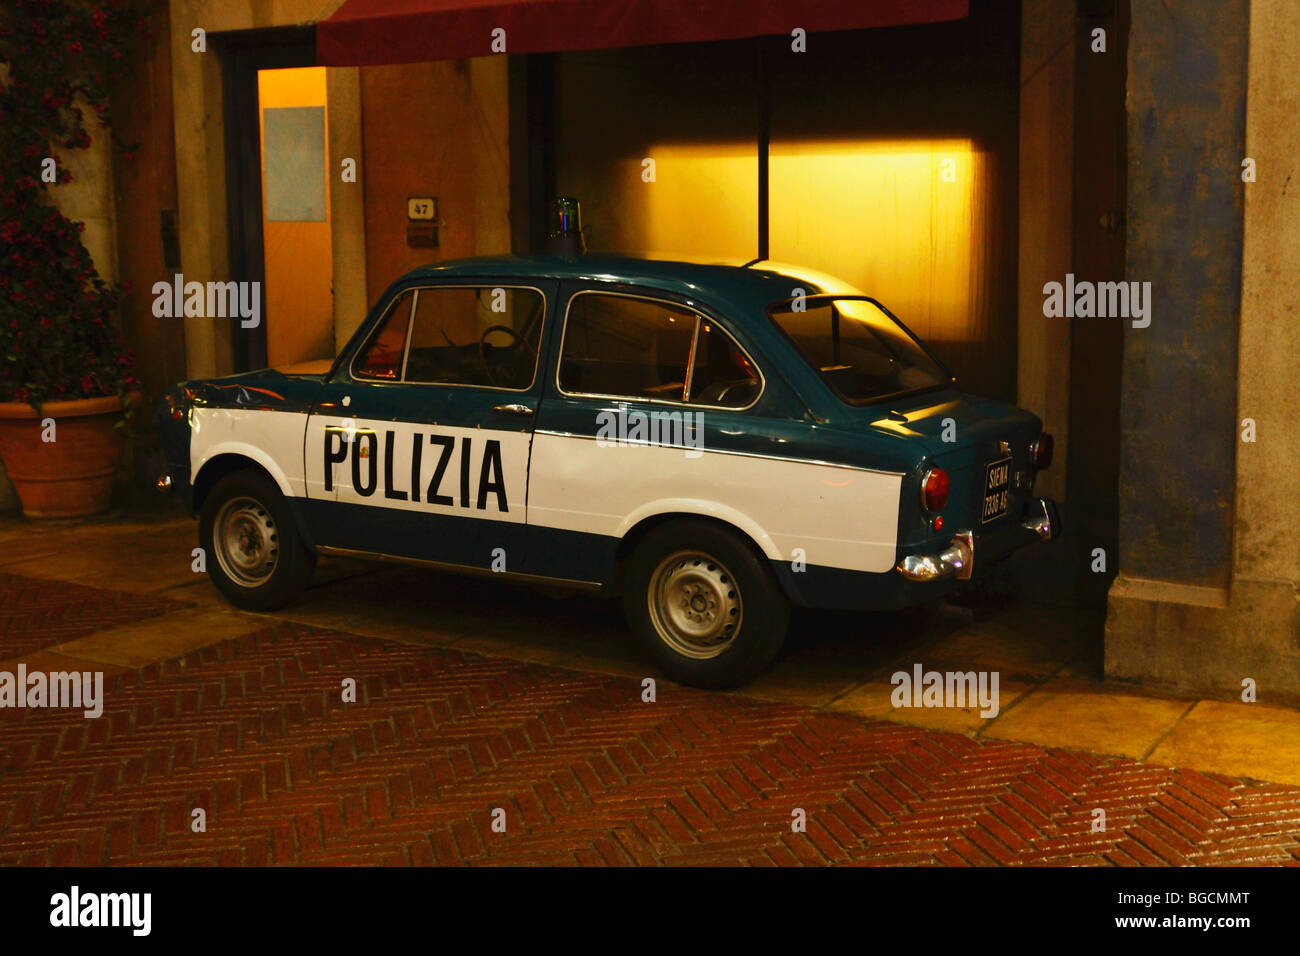 Vintage Italian Police Car at night, front of an apartment on the street. Monte Casino, Johannesburg, South Africa November 2009 Stock Photo